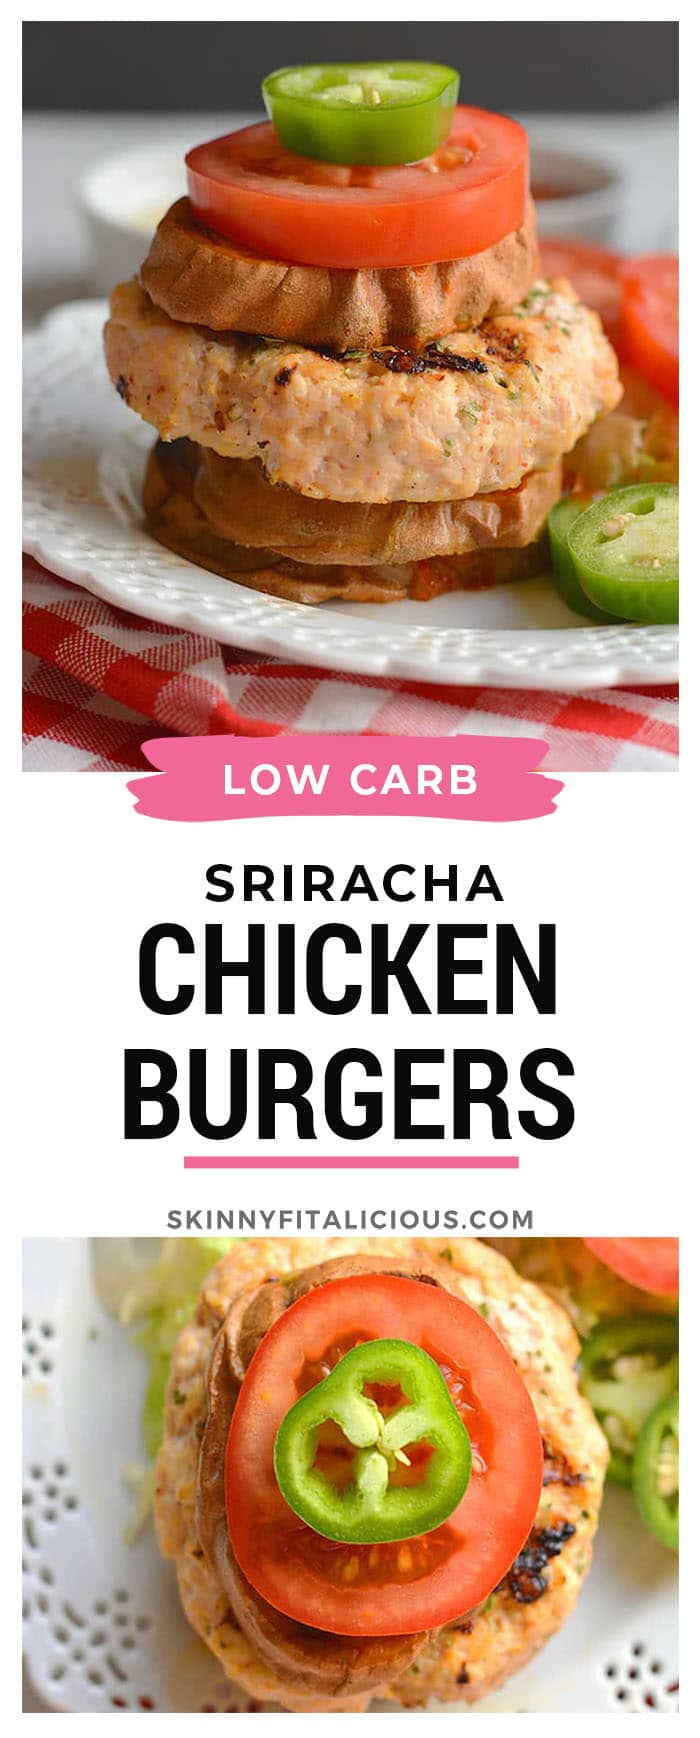 Grilled Sriracha Parsley Chicken Burgers! Sriracha & parsley mixed with chicken, make these burgers to die for! These flavorful, herby, burgers have a hidden kick & can be made on the stove, grill or in the oven. 